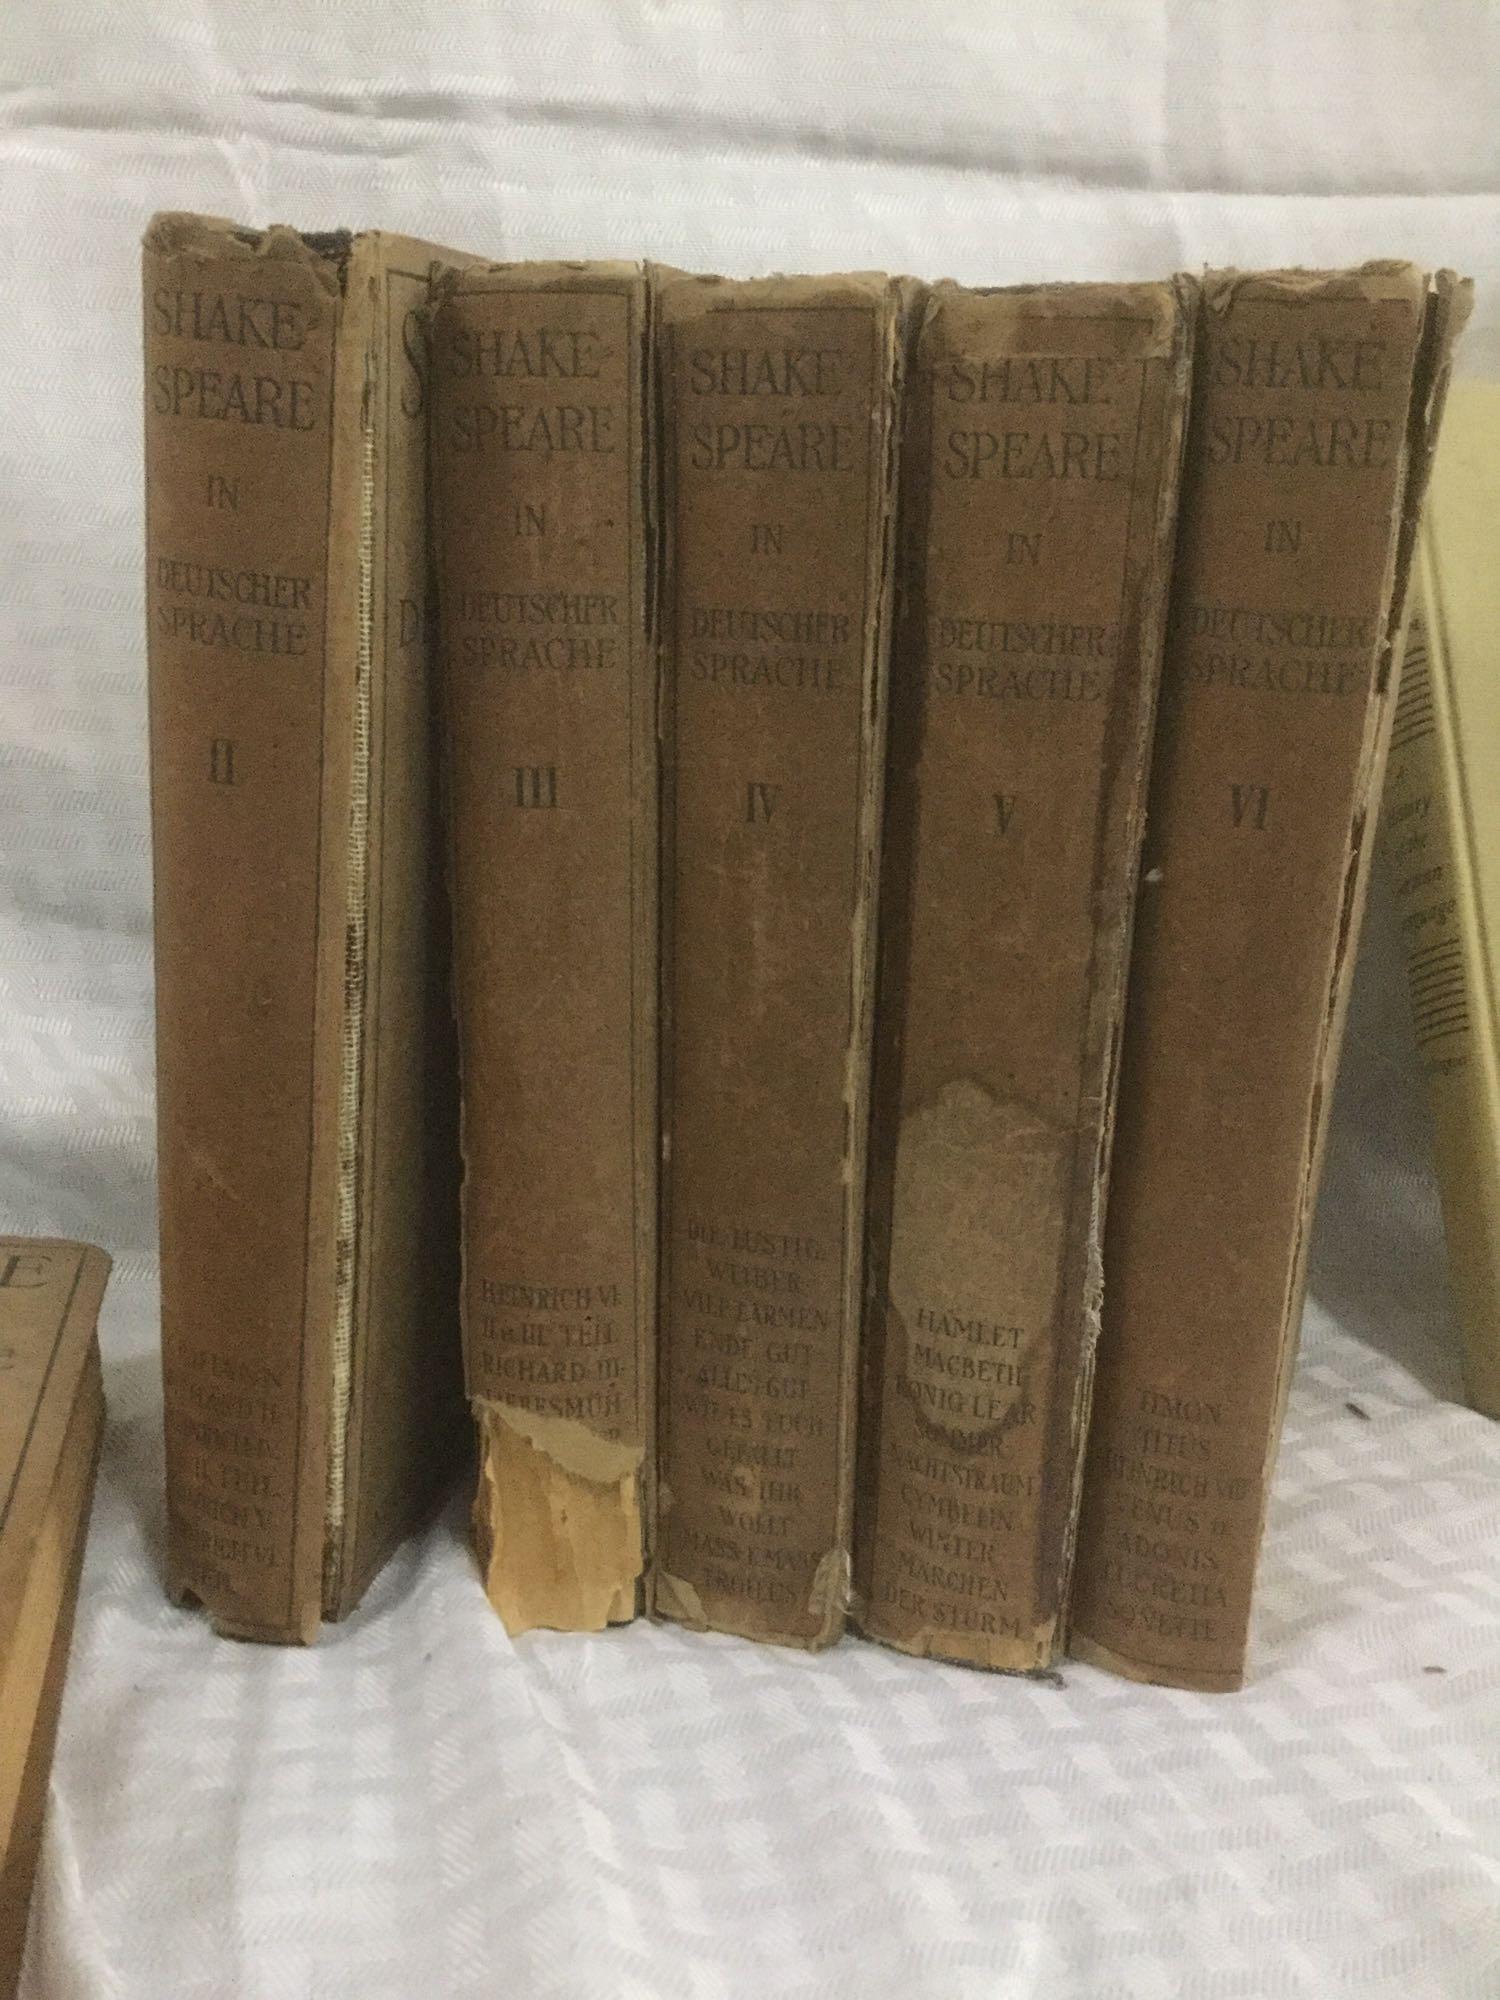 8 Rare books - 6 volume set "Shakespeare in German" 1920 w/ Swastika on cover (as is) + 2 more